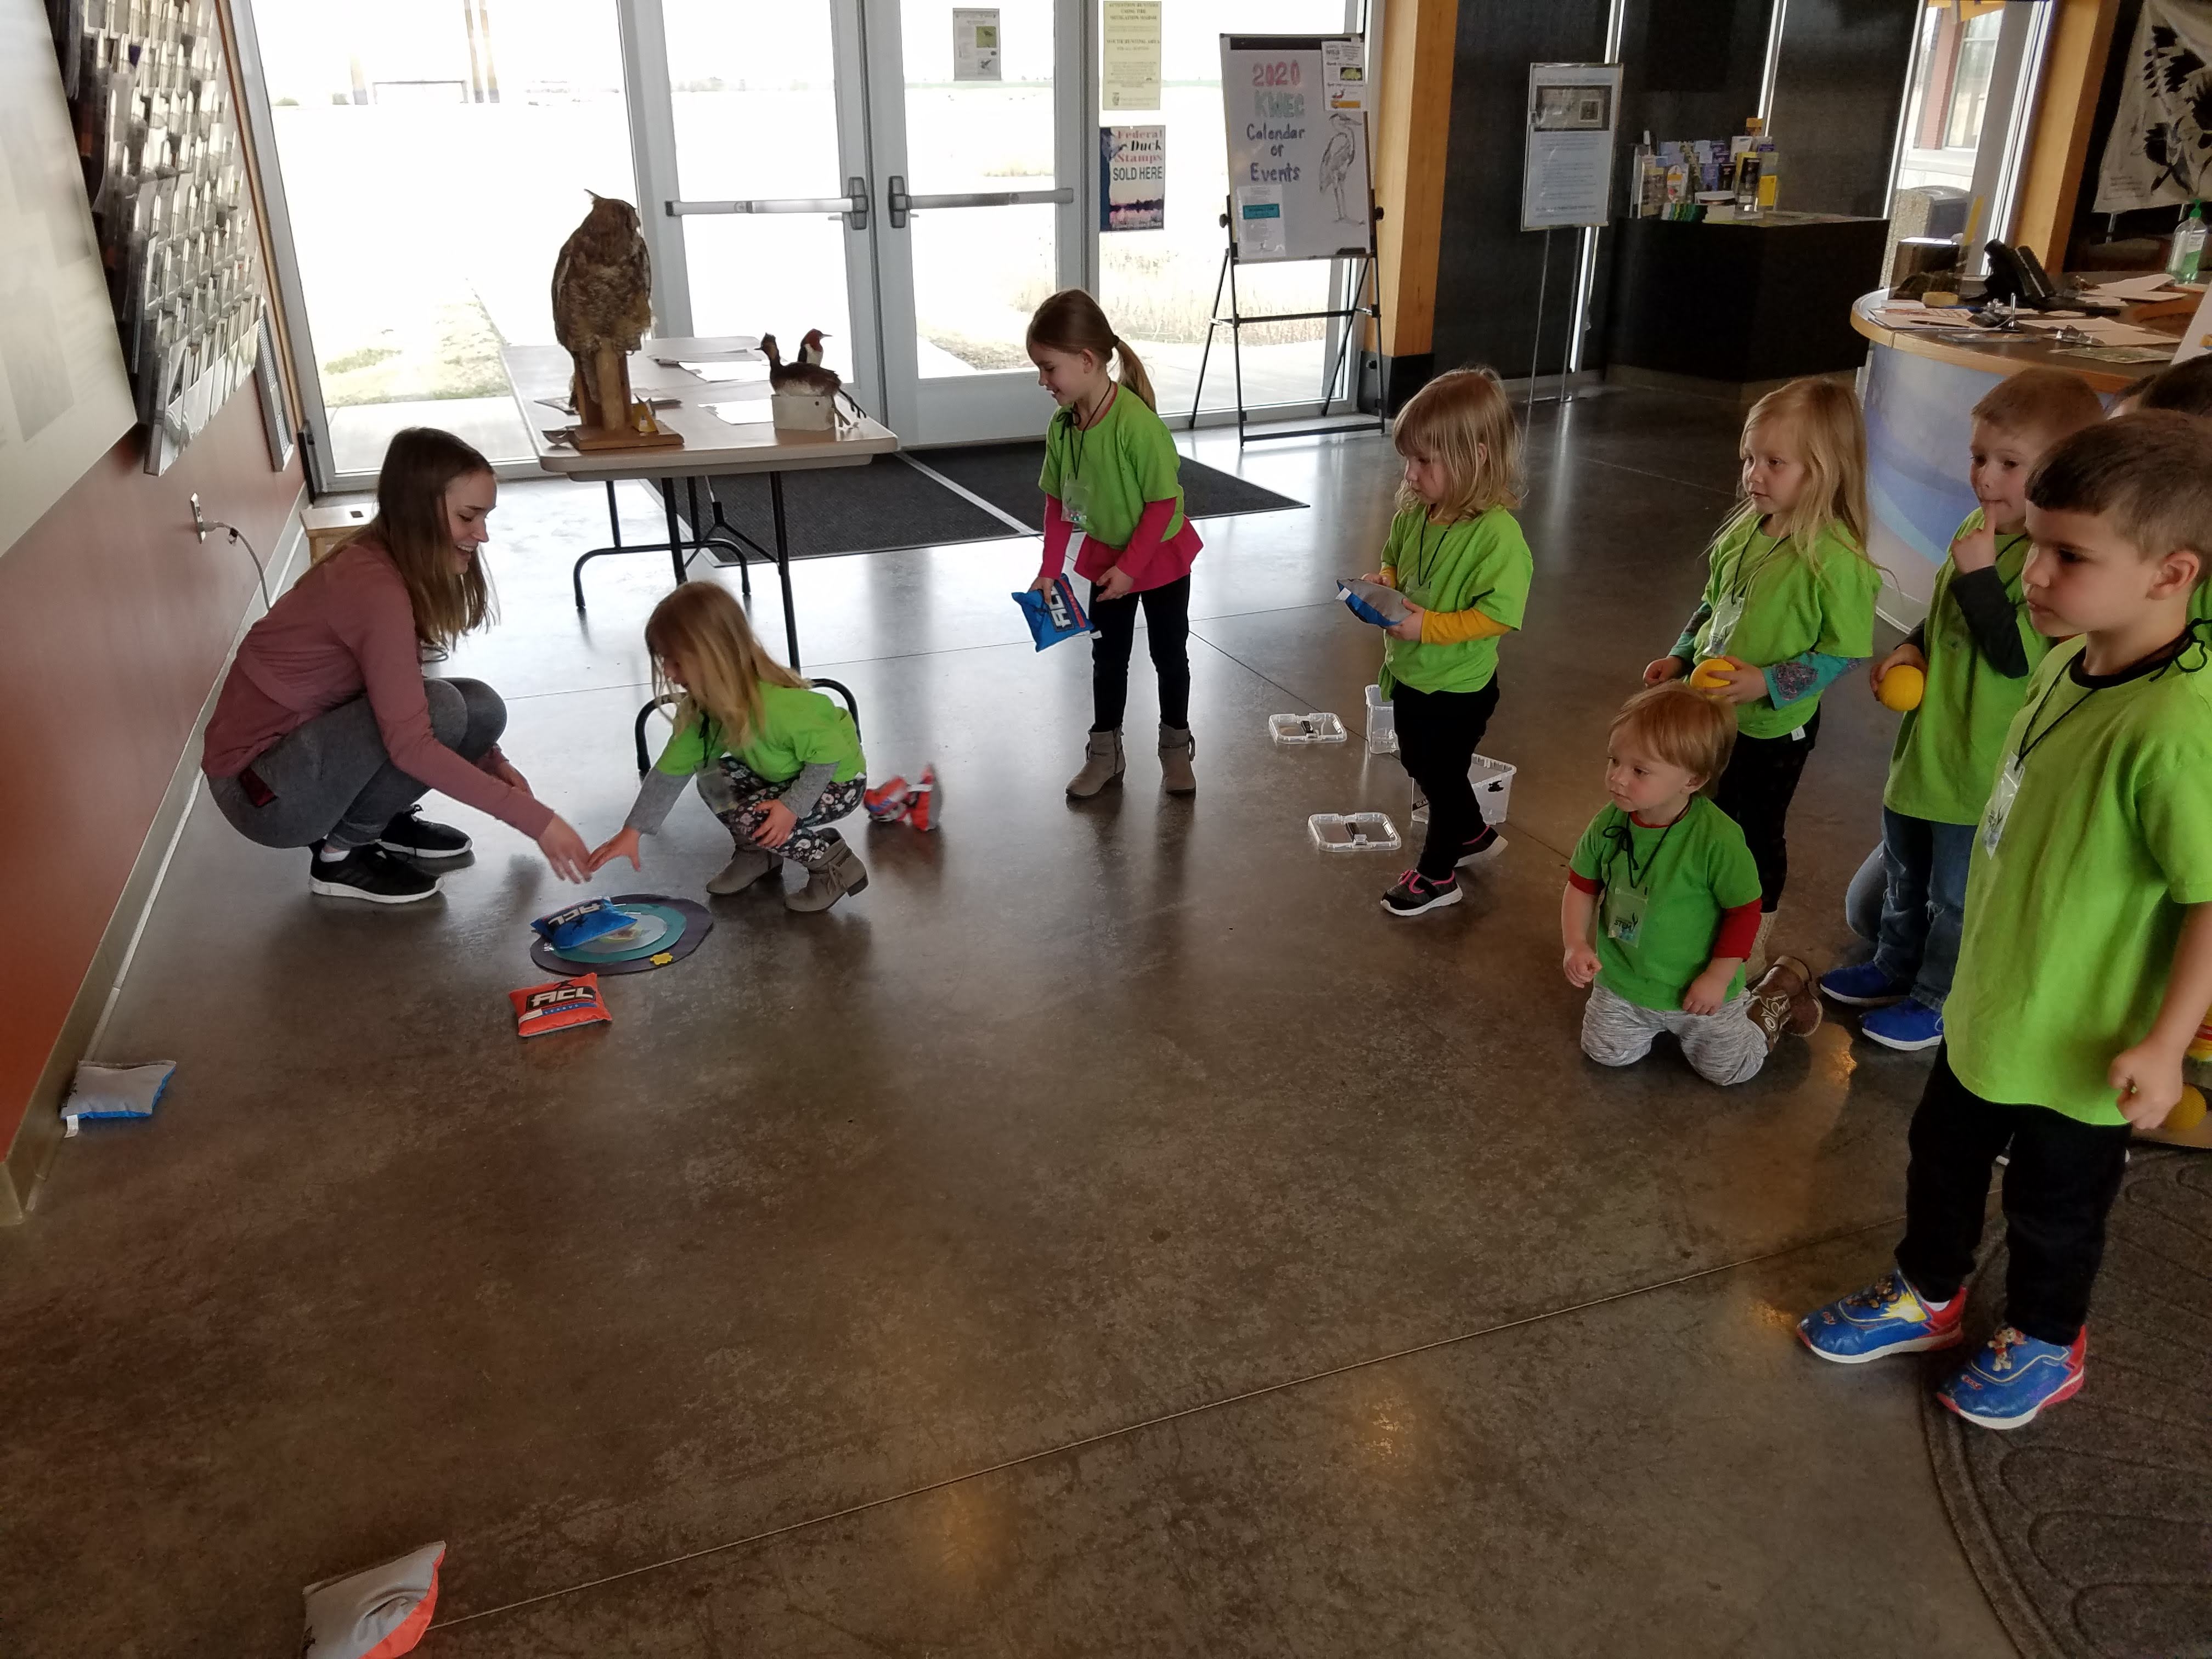 The Kansas Wetlands Education Center is providing spring break activities each day from 1 to 5 p.m. March 15-19. Each day has a different theme!